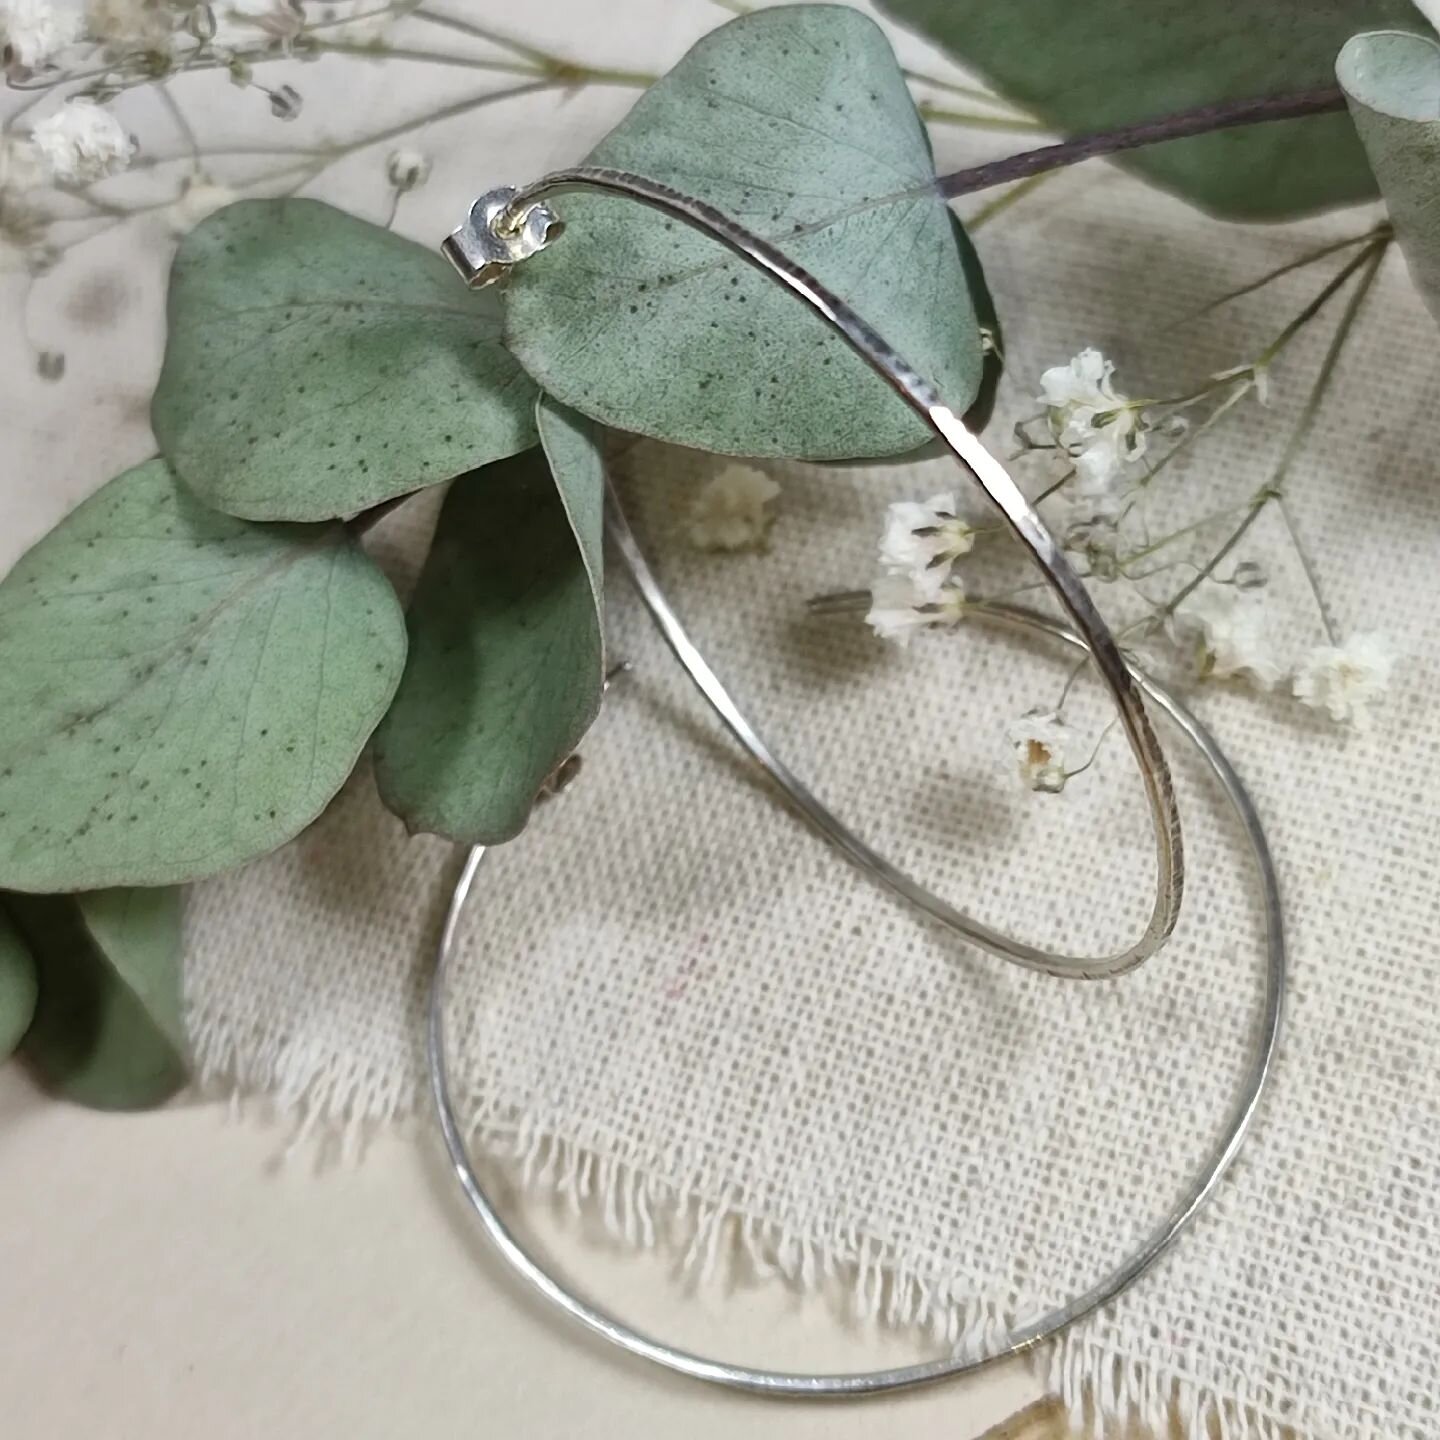 Parfois, c'est une simple paire de cr&eacute;oles dont tu as besoin!

Sometimes it's a simple pair of hoops earrings that you need!

Made to measure in silver and gold pm for a special order 😊

#creoles #hoopearrings #faitmain #faitalamain #handmade